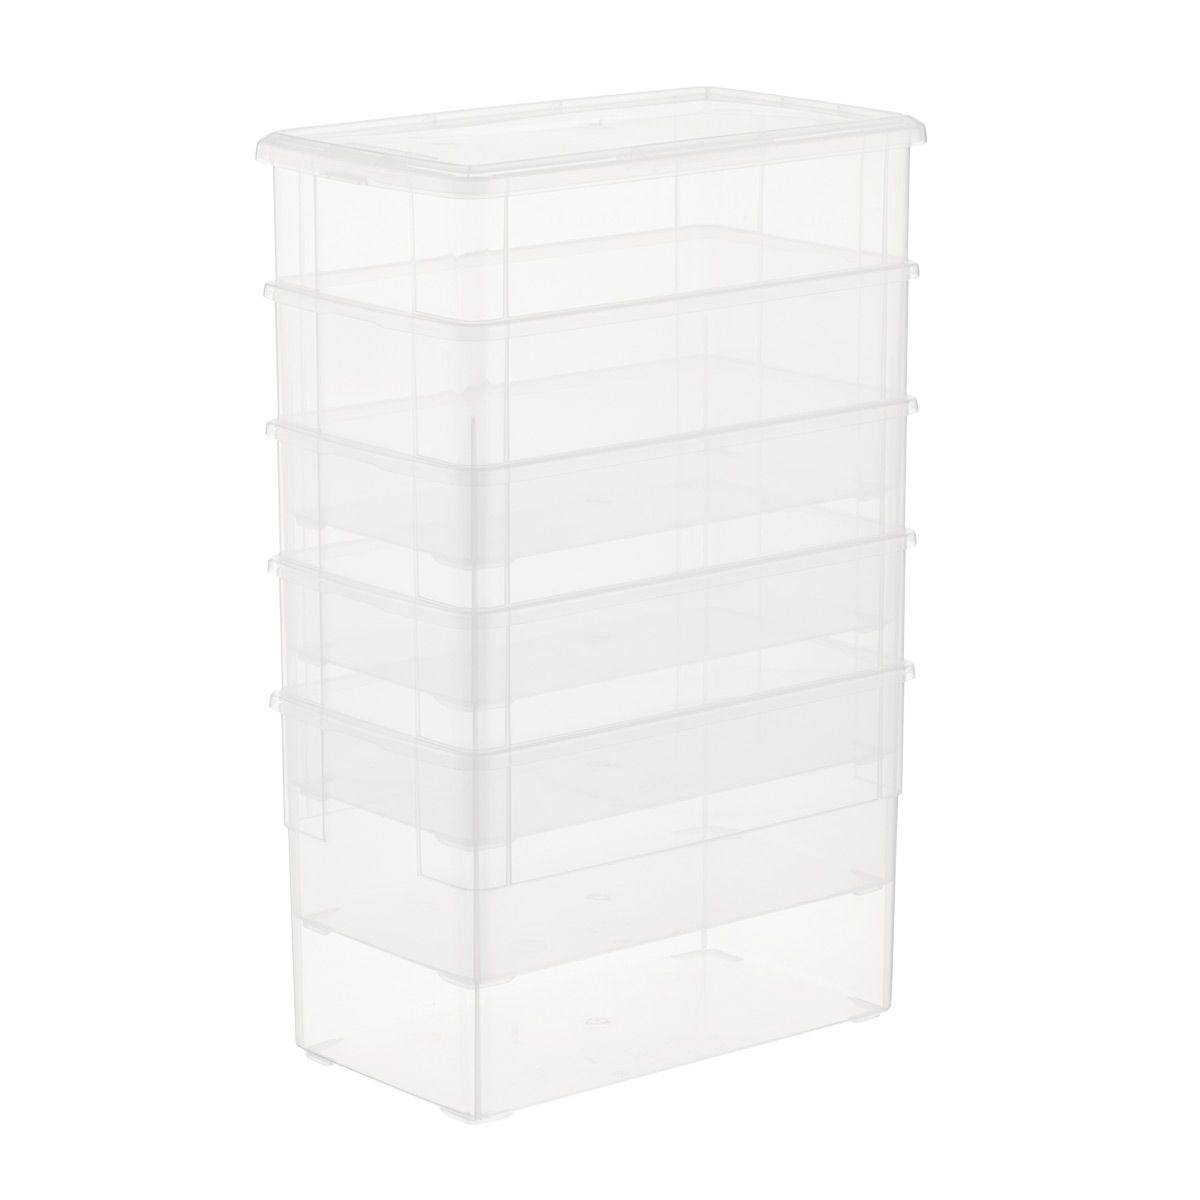 Case of 5 Our Tall Shoe Box | The Container Store